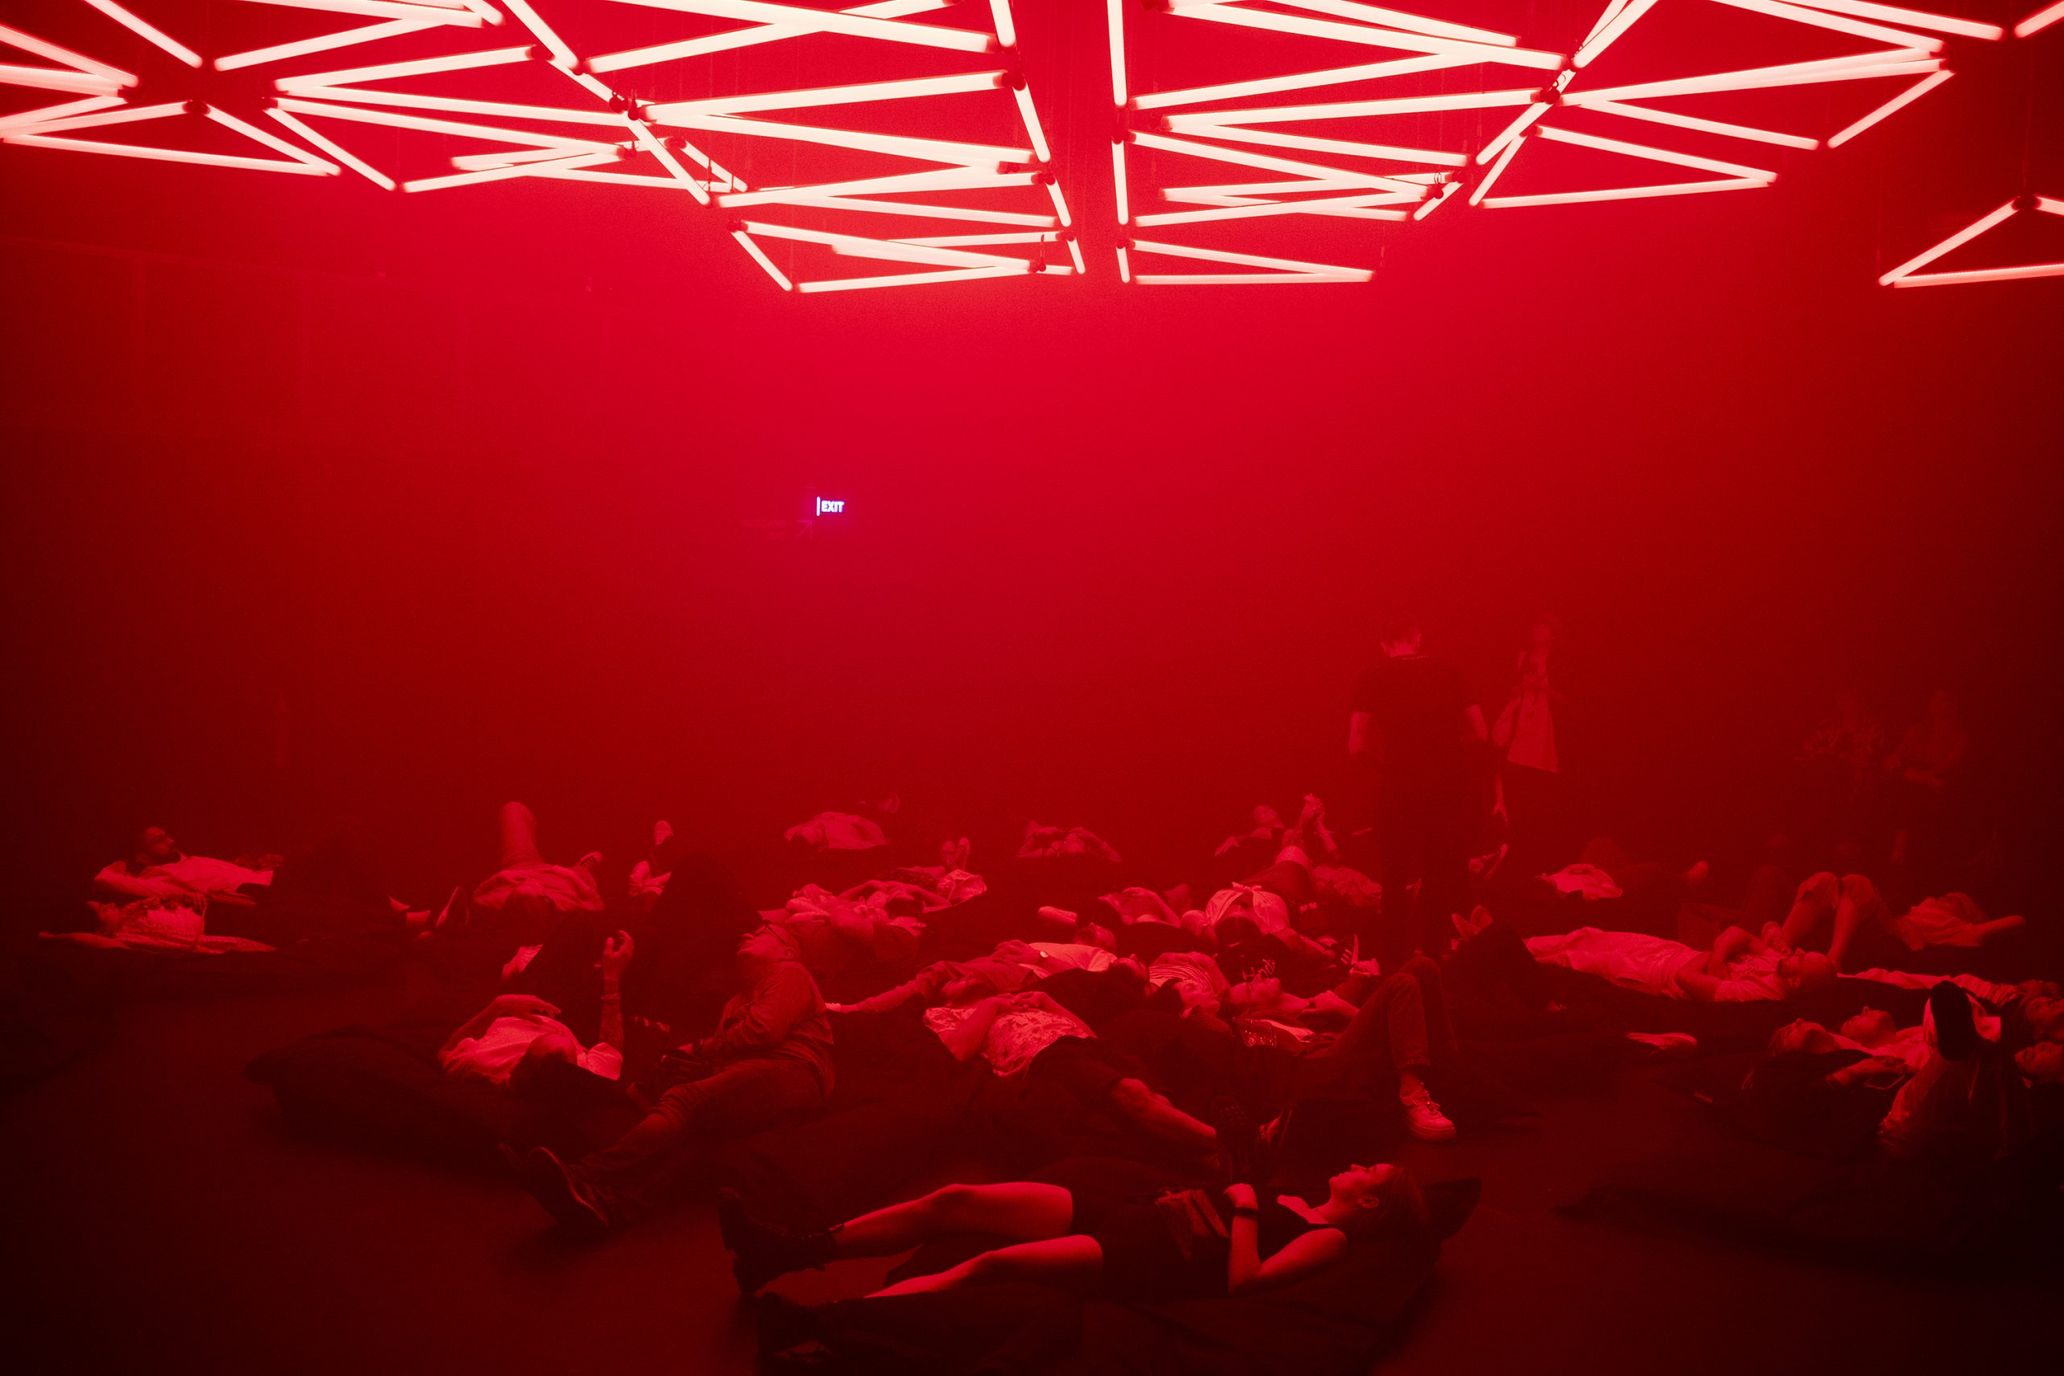 Light Installation DARK MATTER; Kyoka and Yone-ko Colors the Party in Berlin